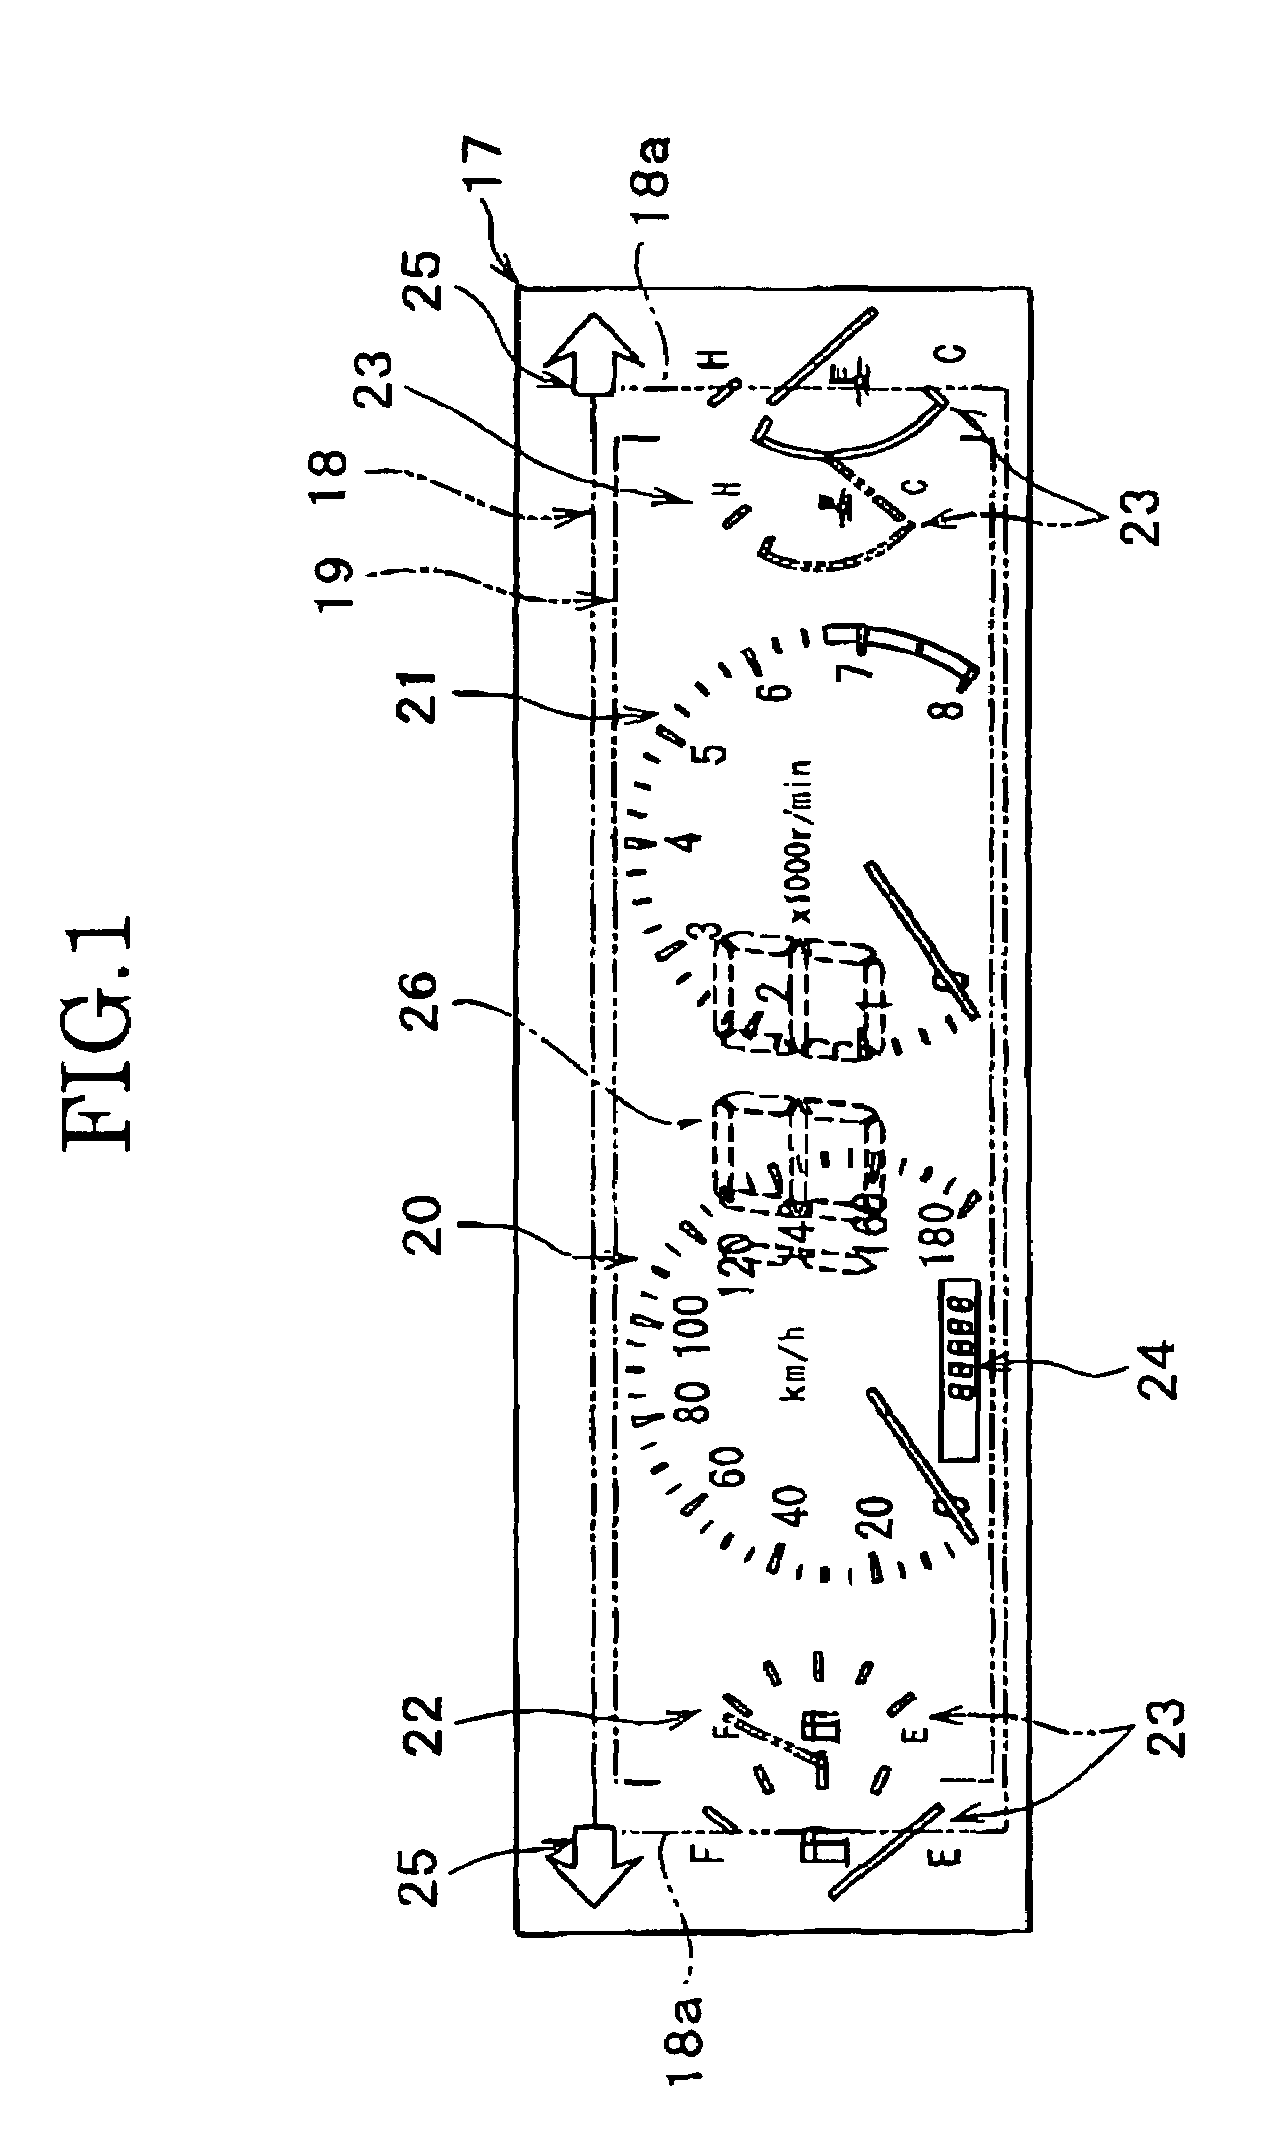 Information displaying apparatus for a vehicle